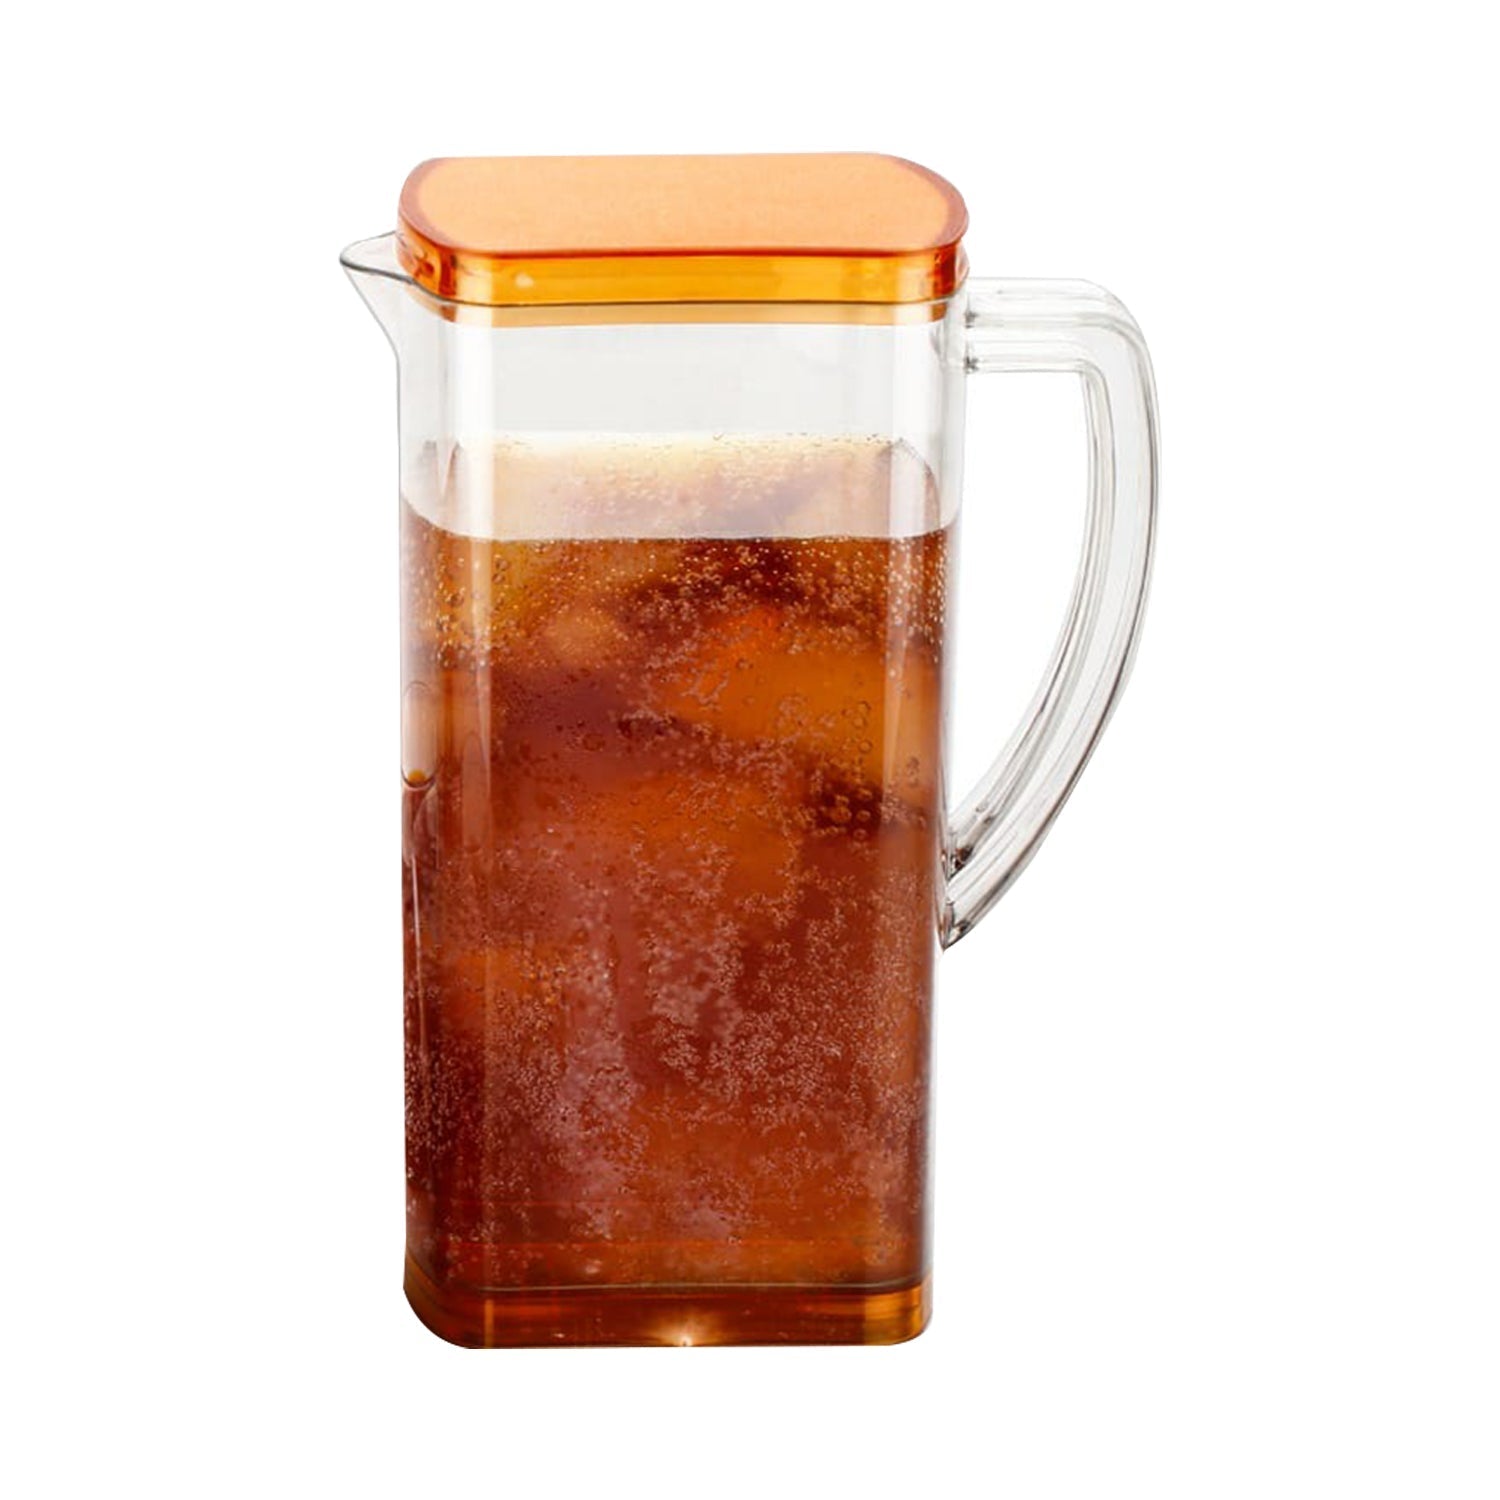 2789 2000Ml Square Jug For Carrying Water And Types Of Juices And Beverages And All.